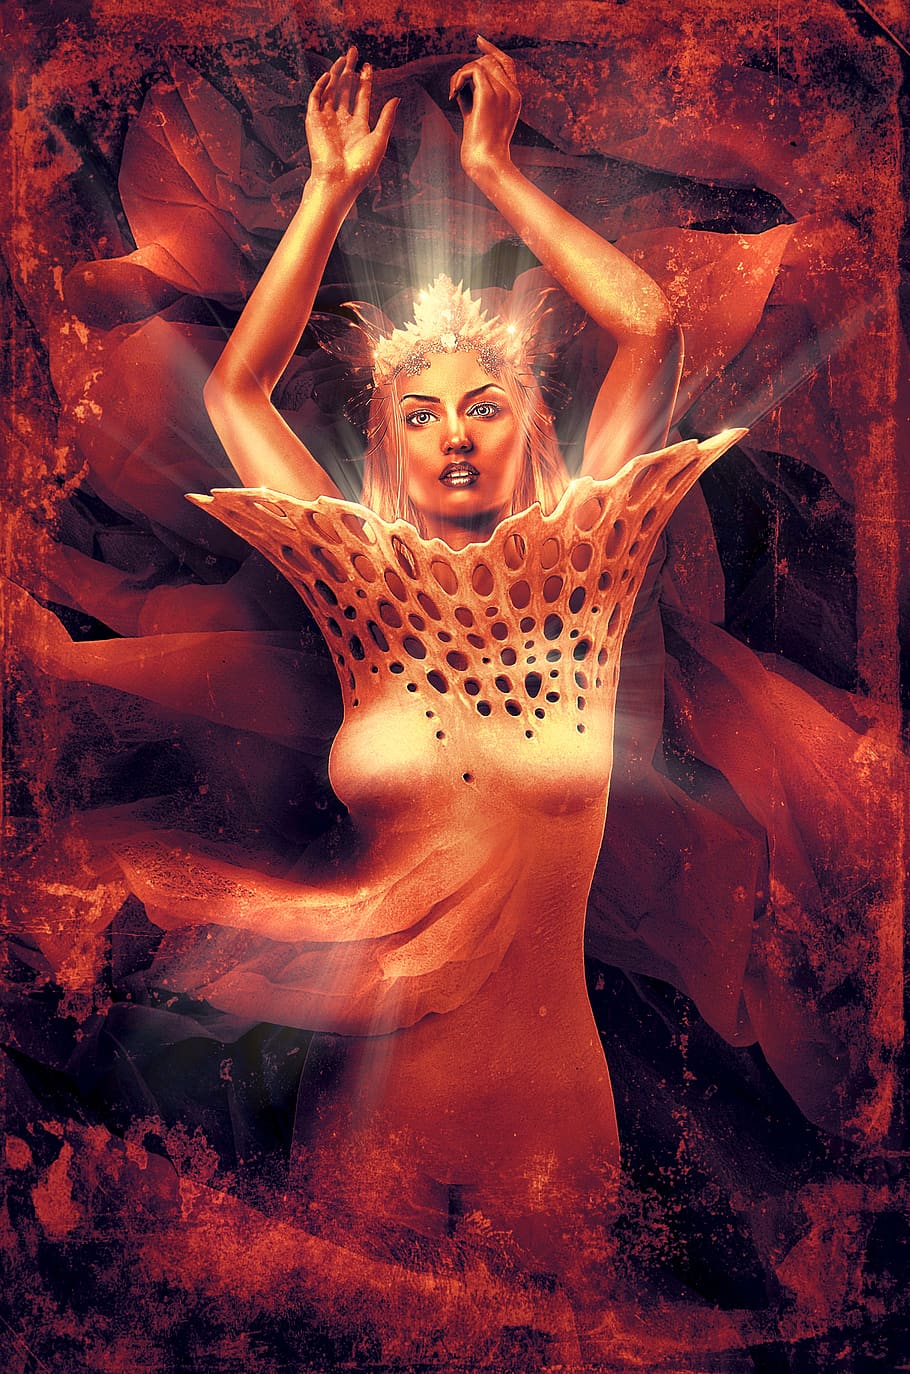 book cover, enlightenment, woman, body, red, composing, photomontage